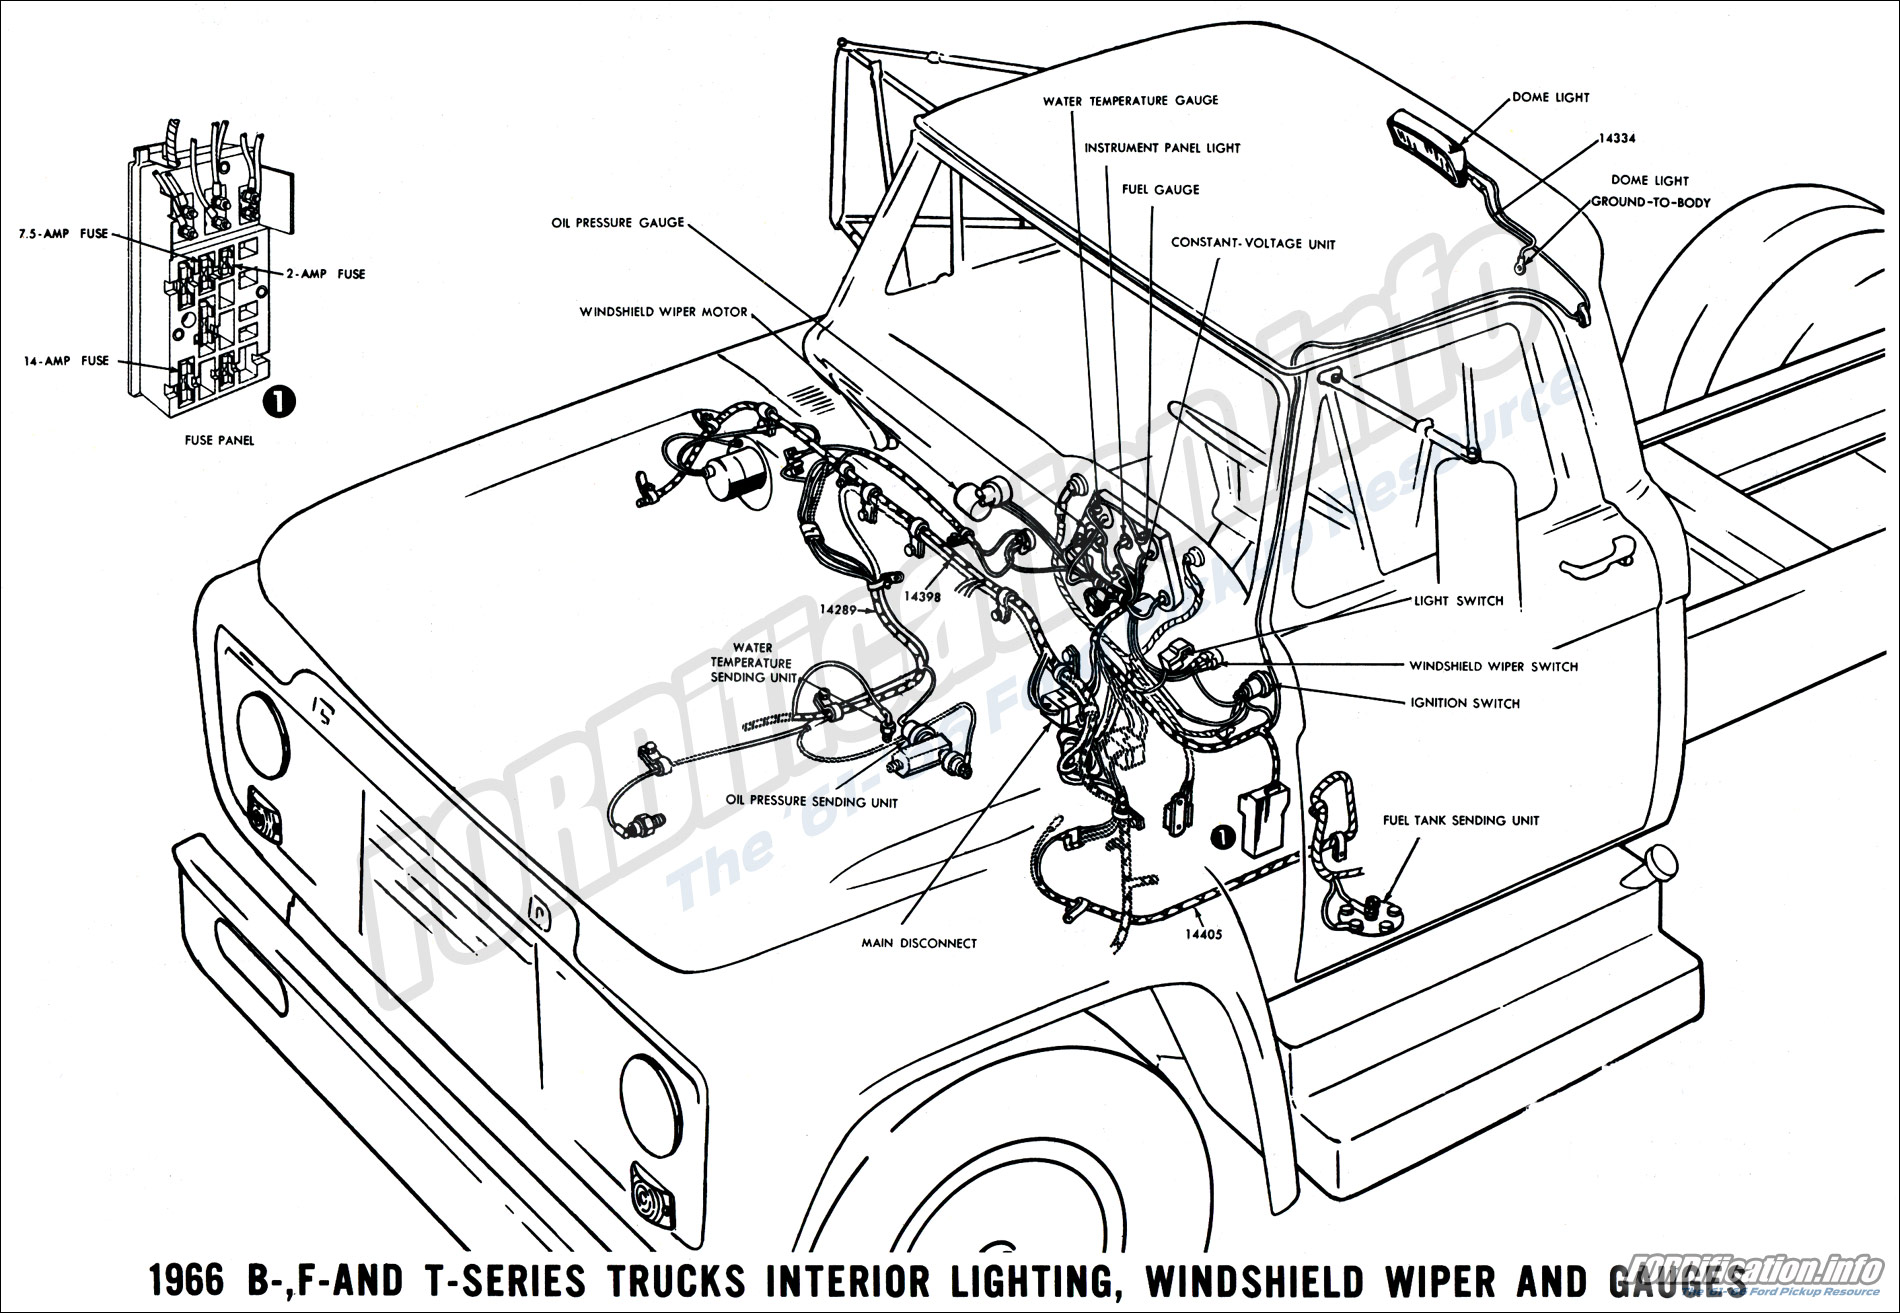 1966 Ford Truck Wiring Diagrams - Fordification Info